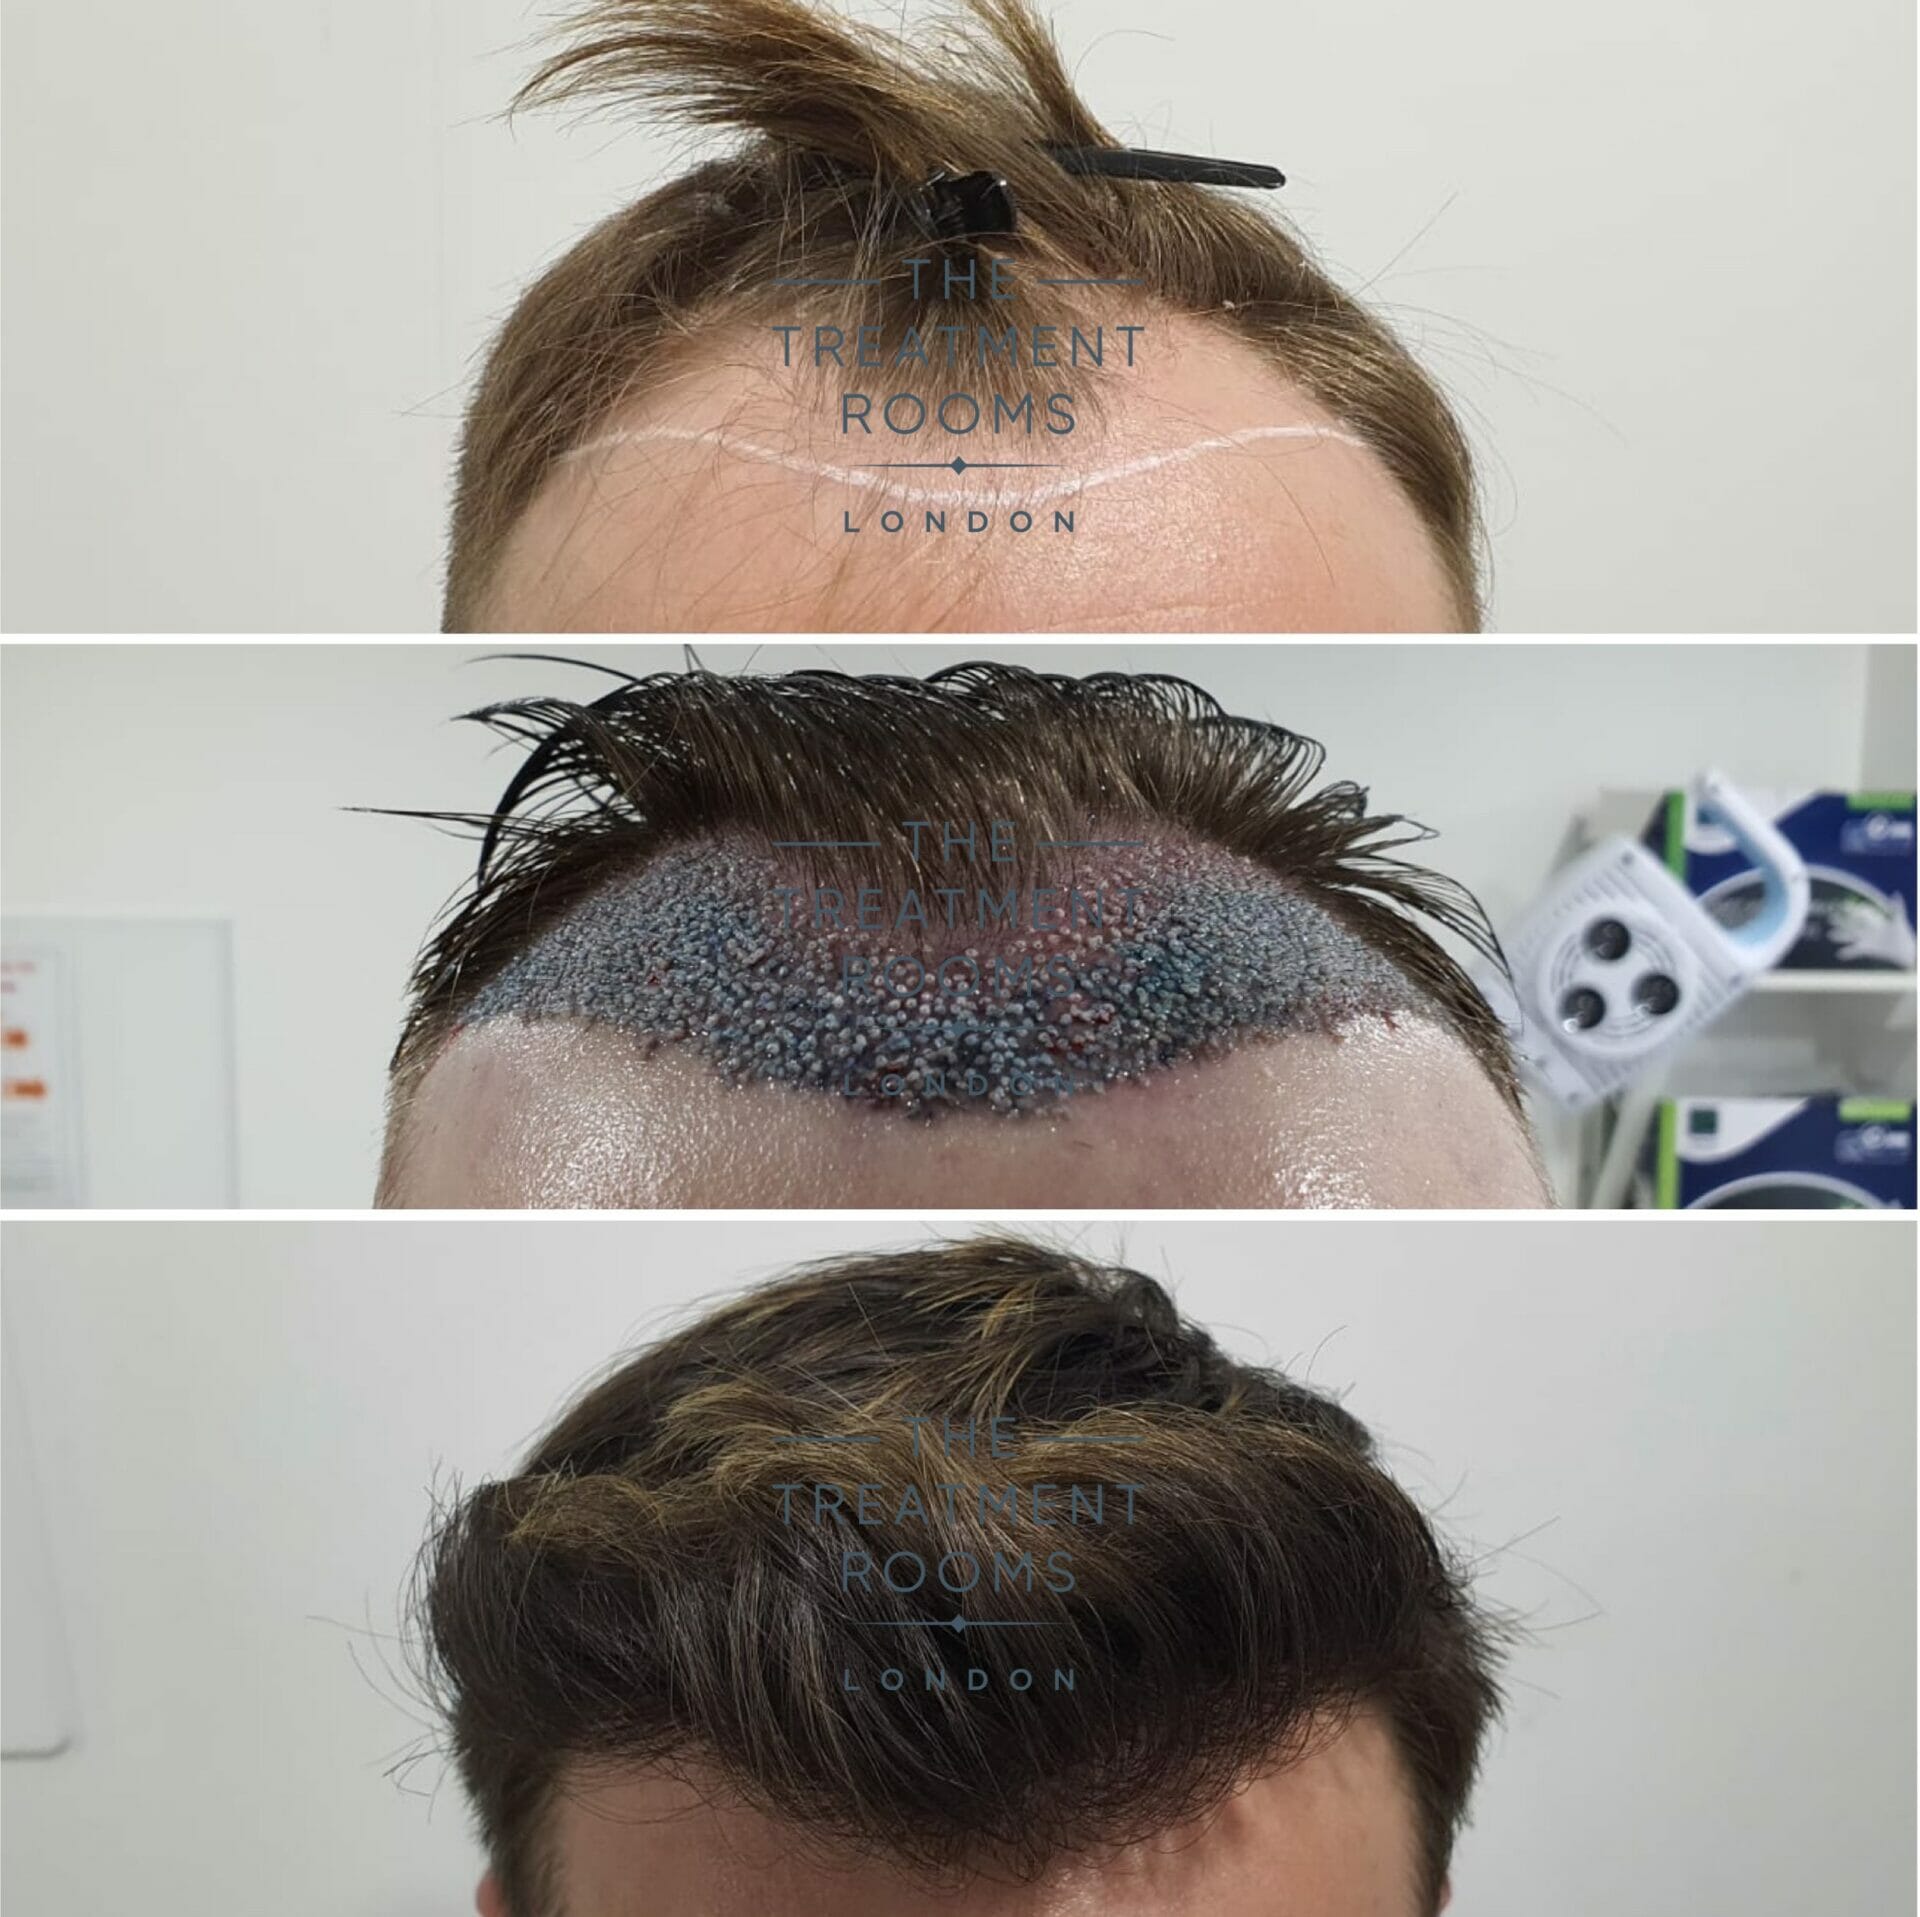 Unshaven FUE Hair Transplant (UFUE) | The Treatment Rooms London